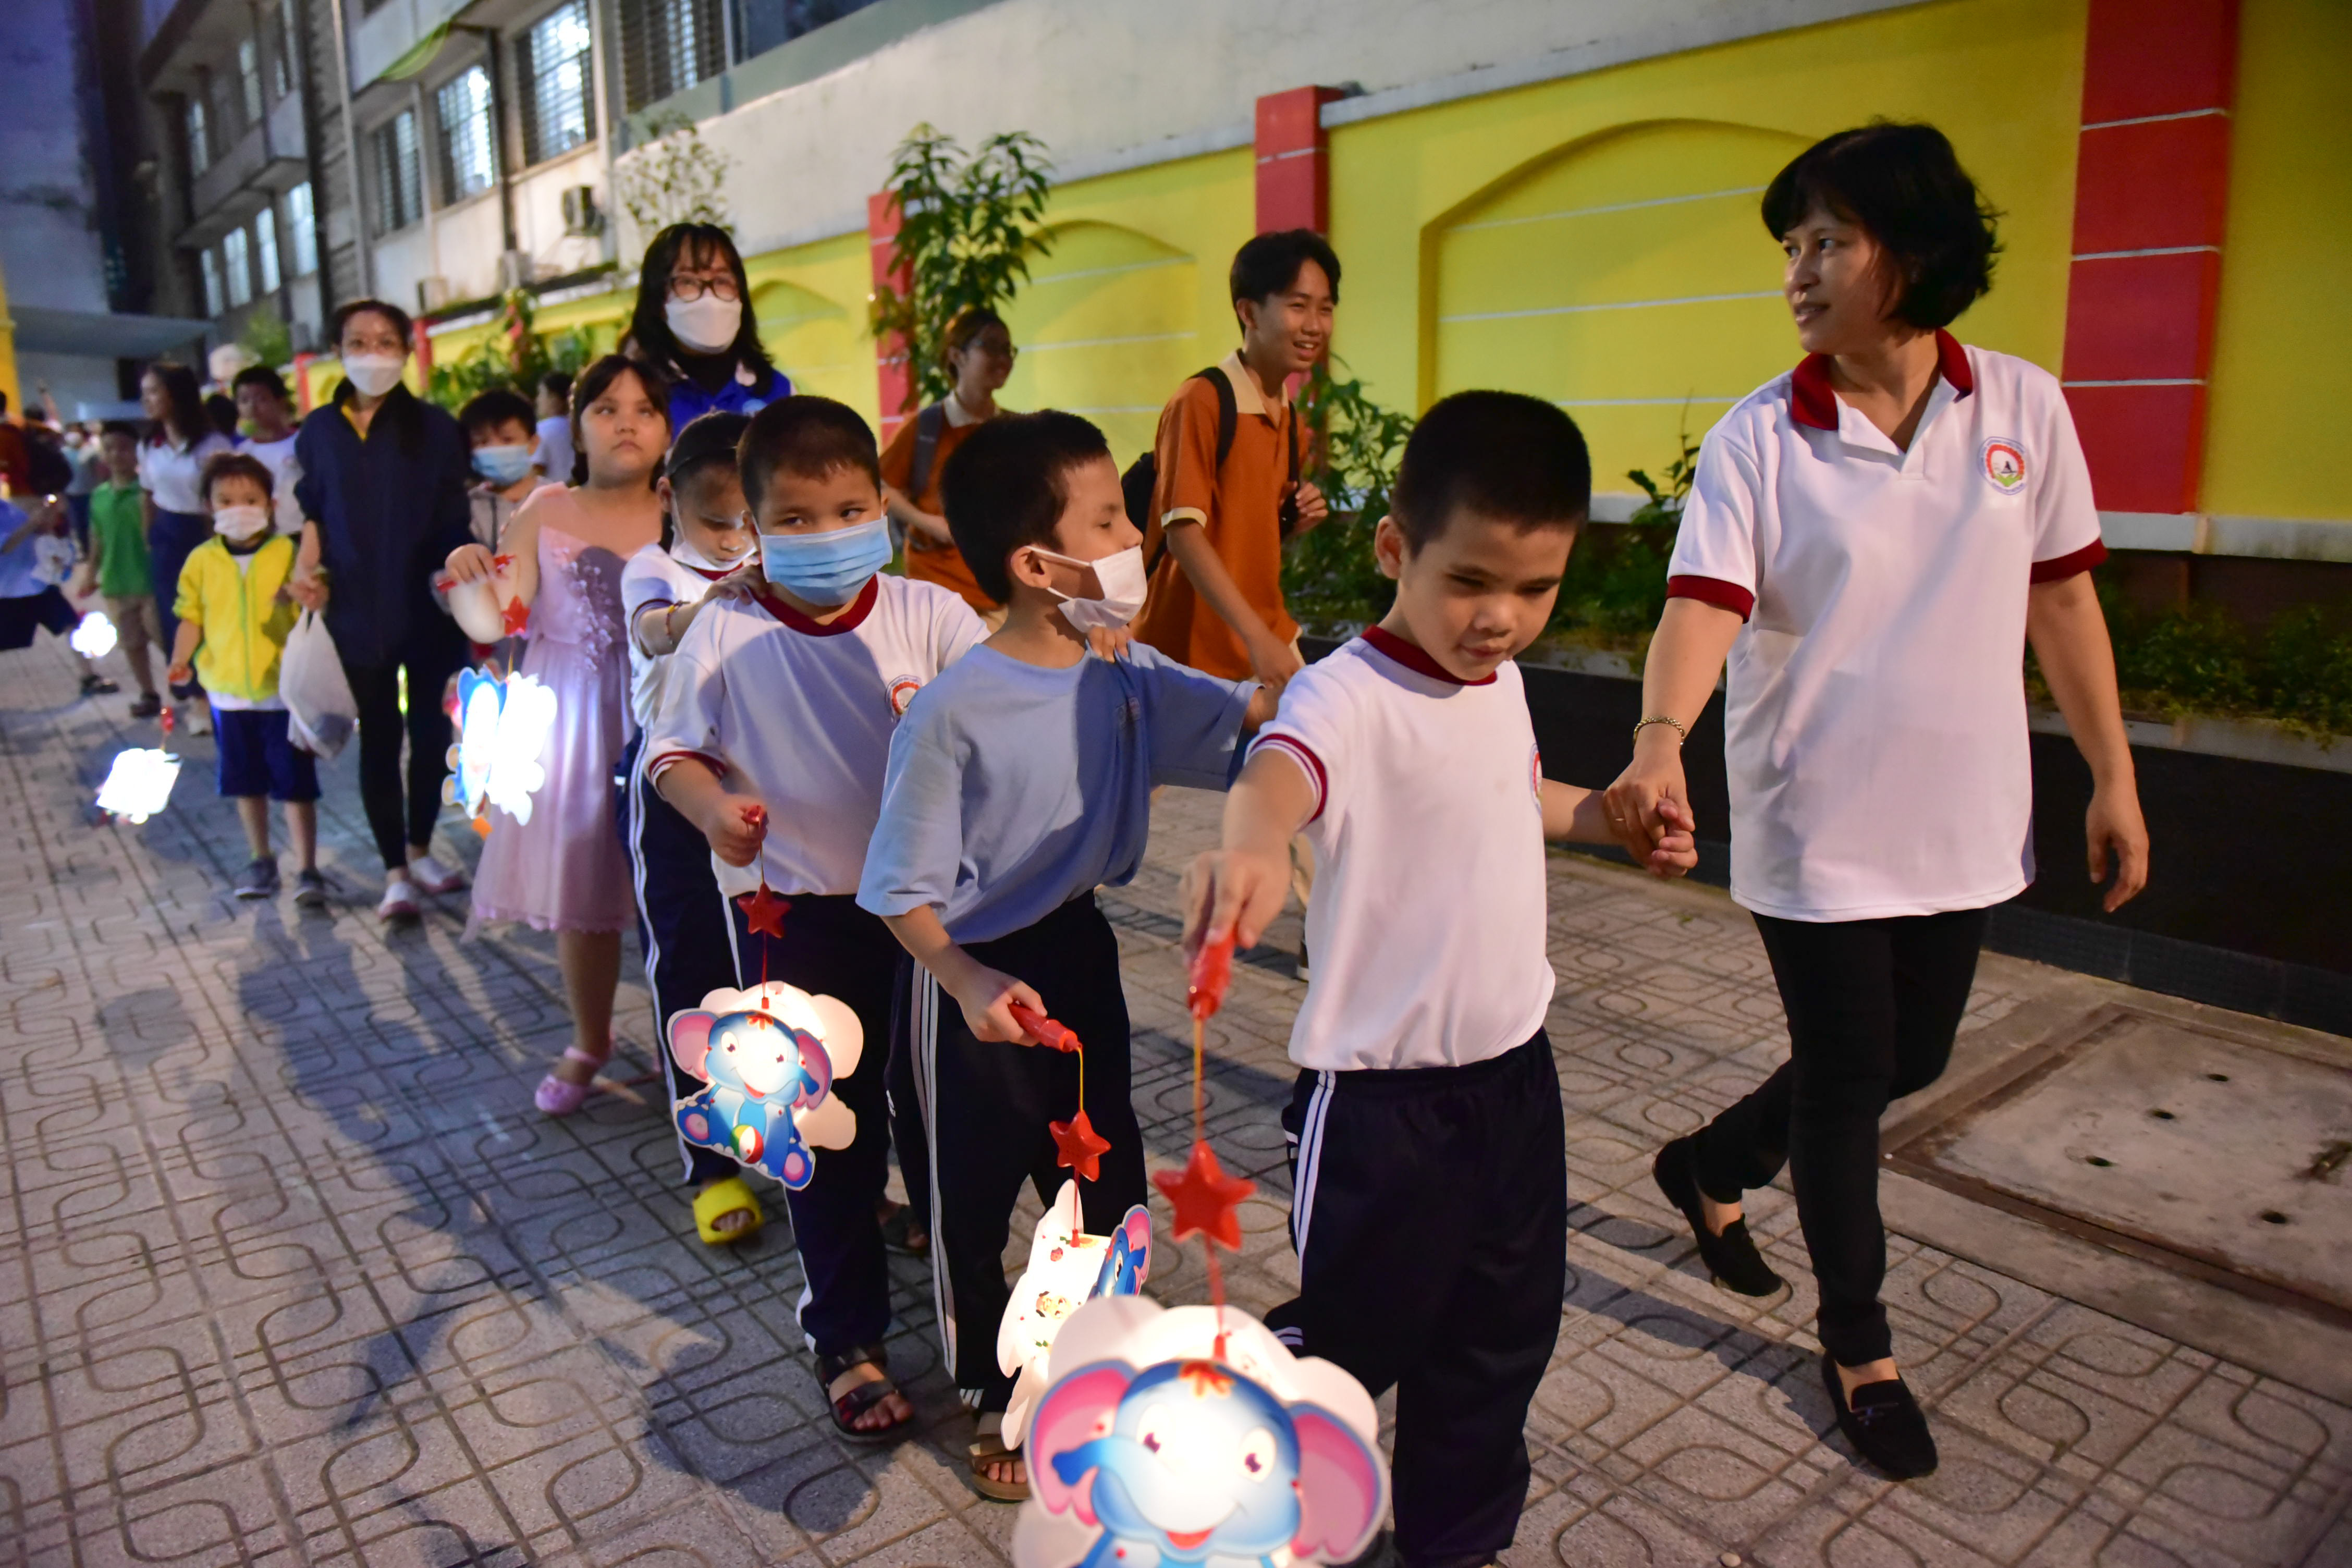 Children attend a lantern parade to celebrate the Mid-Autumn Festival held by Nguyen Dinh Chieu Special School for the Blind in District 10, Ho Chi Minh City on September 9, 2022. Photo: Ngoc Phuong / Tuoi Tre News